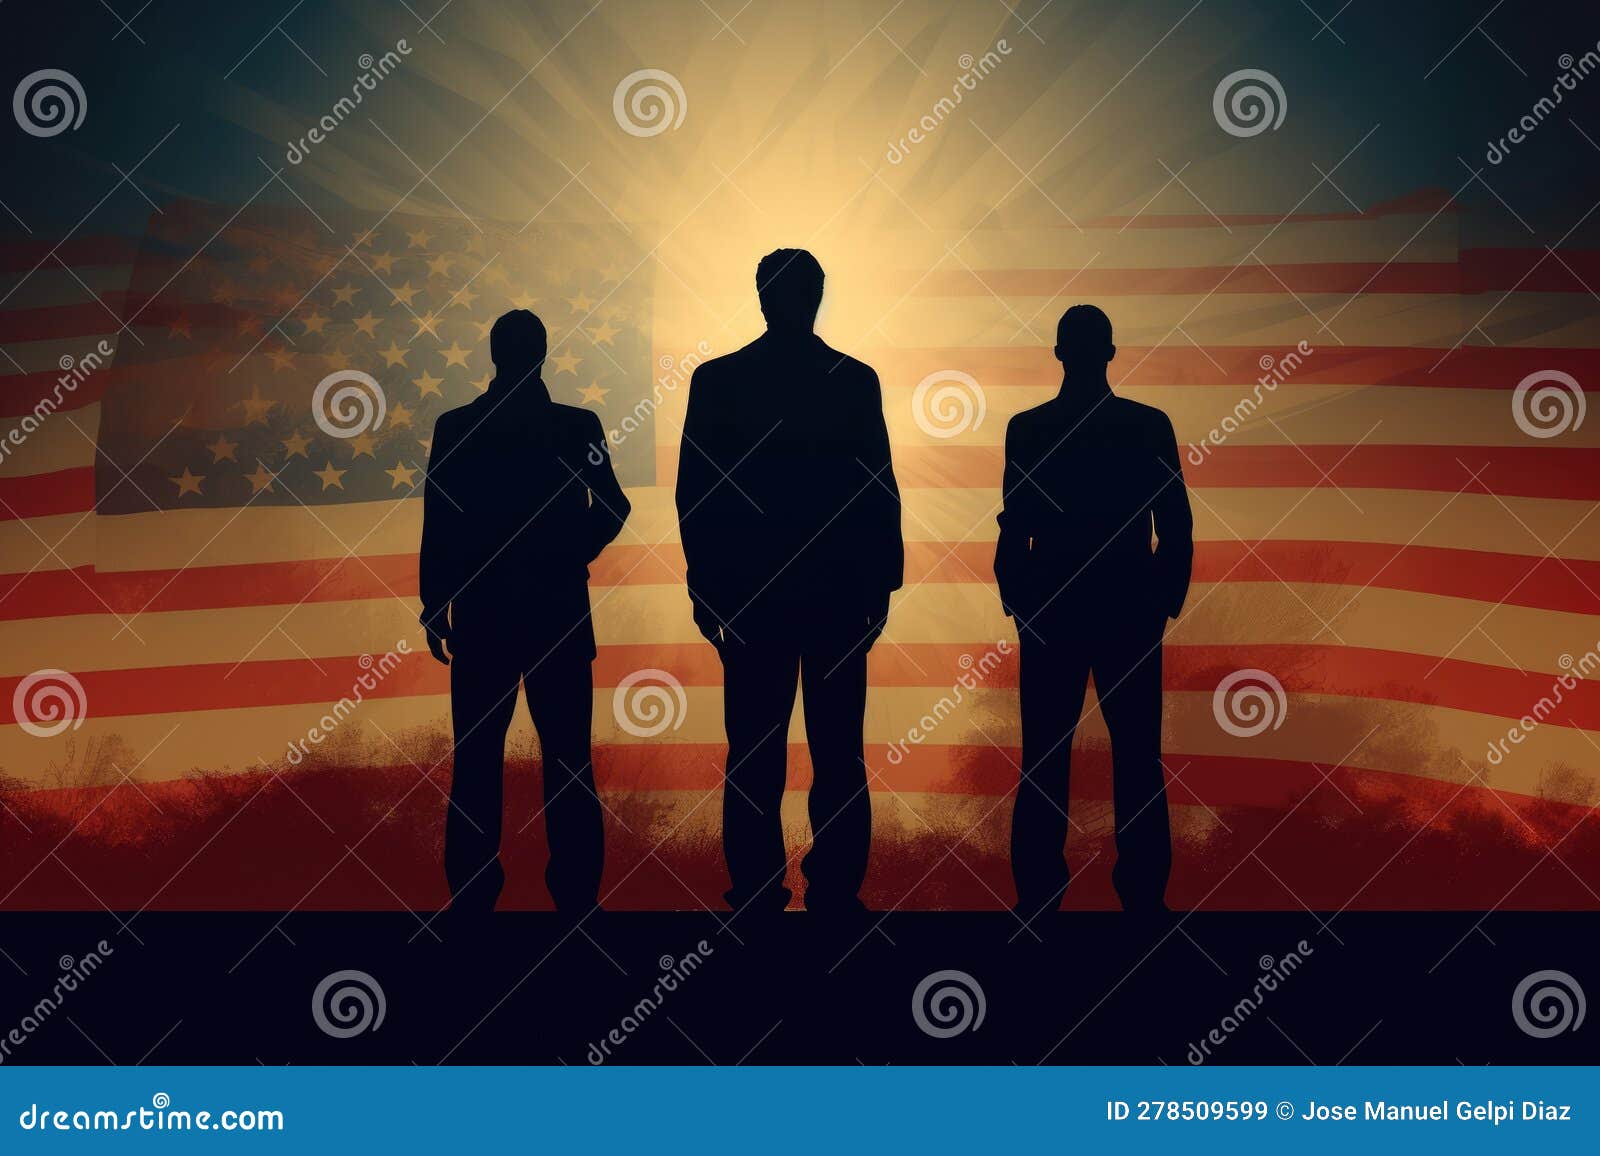  for independence day of the united states, july 4th - soldiers with american flag under a beautiful sun. generative